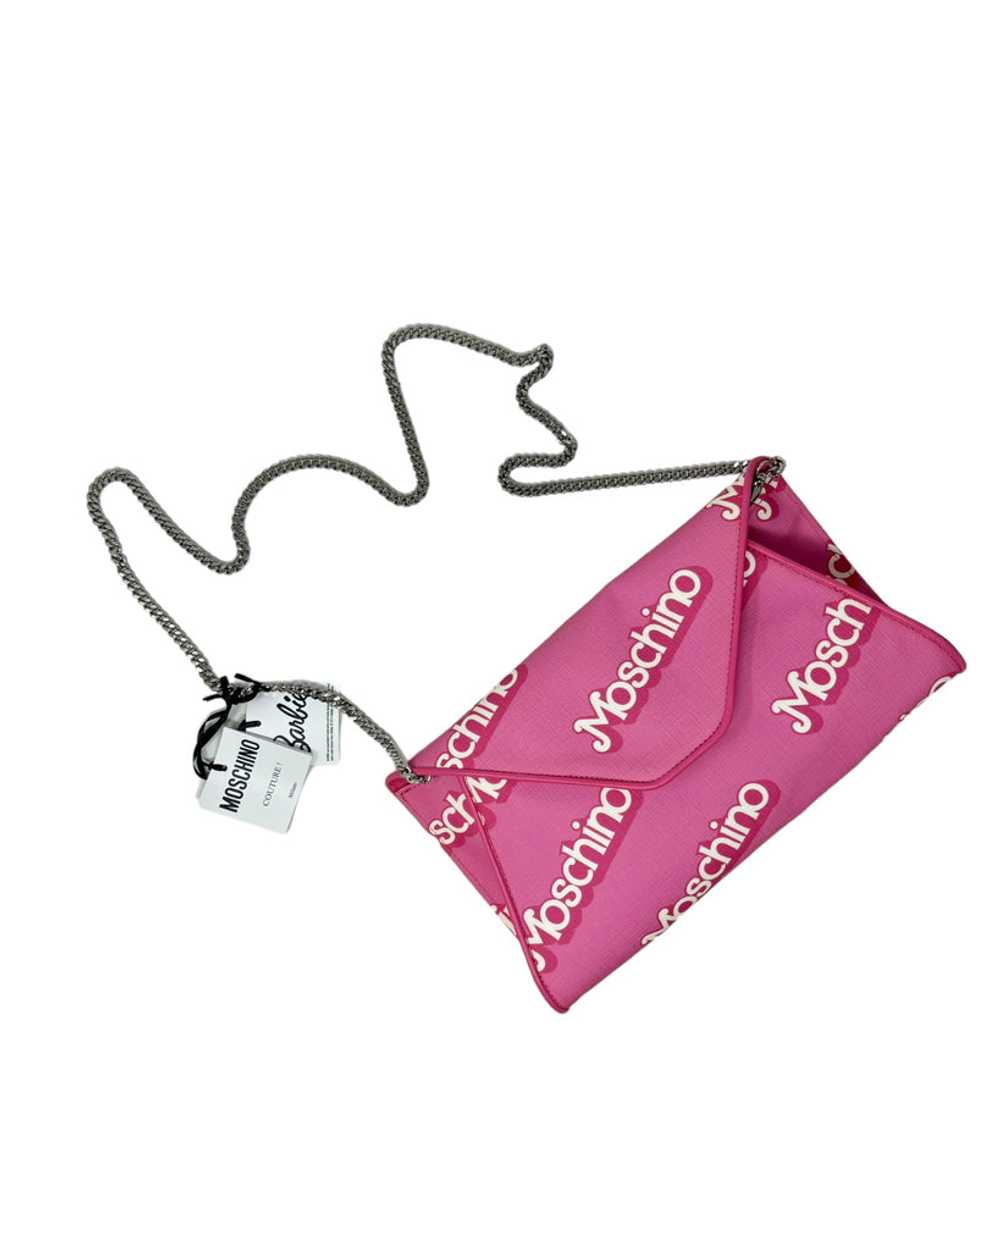 Moschino Barbie Pink Saffiano Leather Clutch with… - image 3